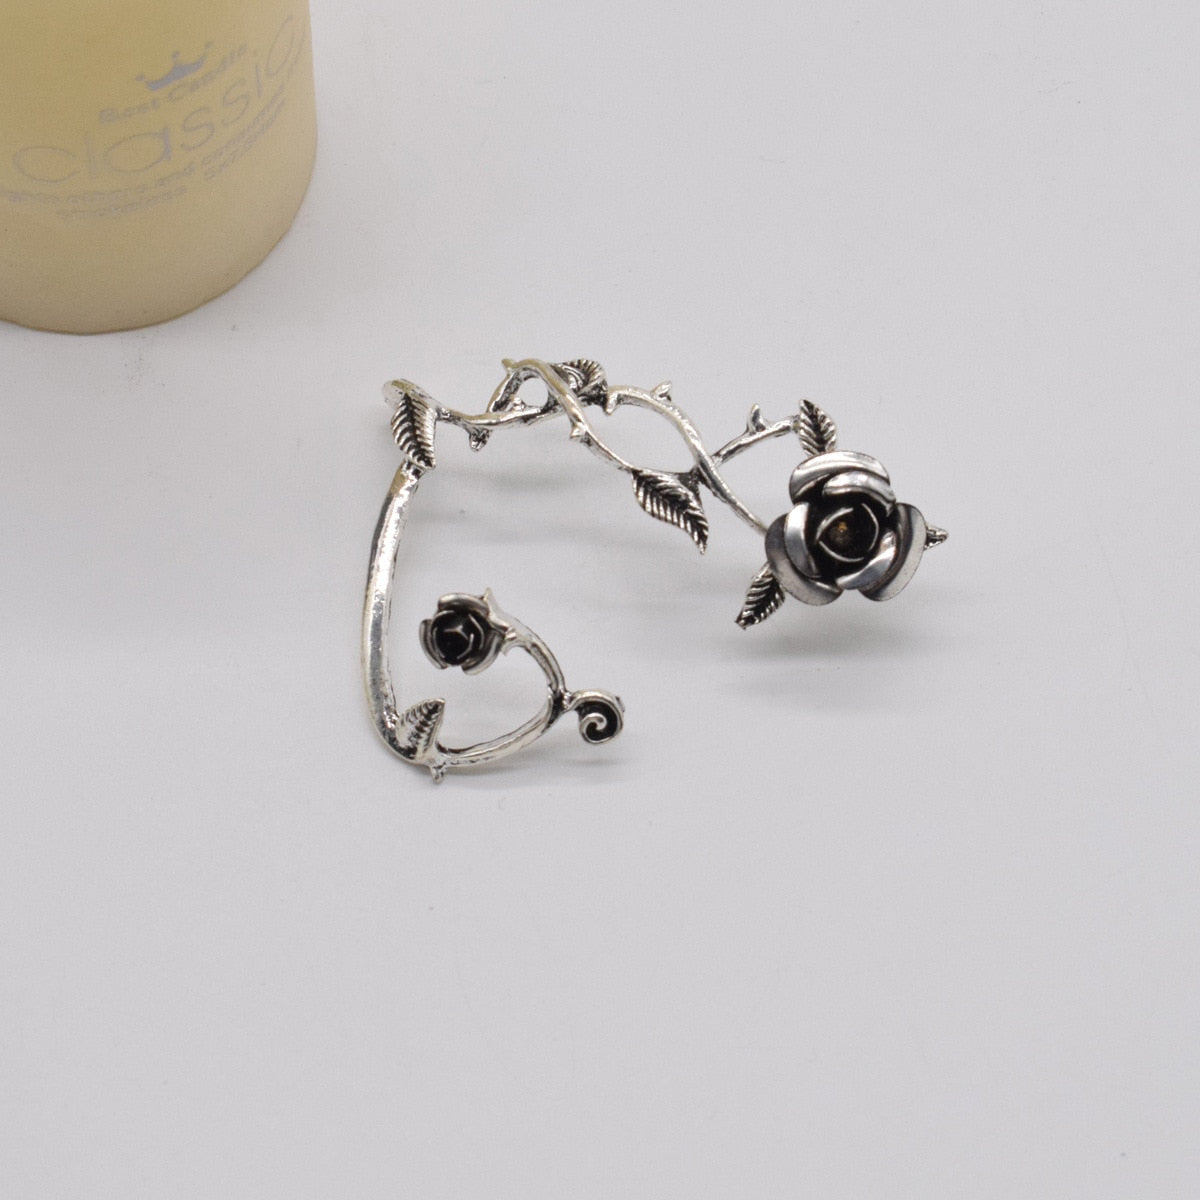 Thorn Seduction Ear Cuff. Entangle them in with this wild rose earring cuff that wraps around your ear.